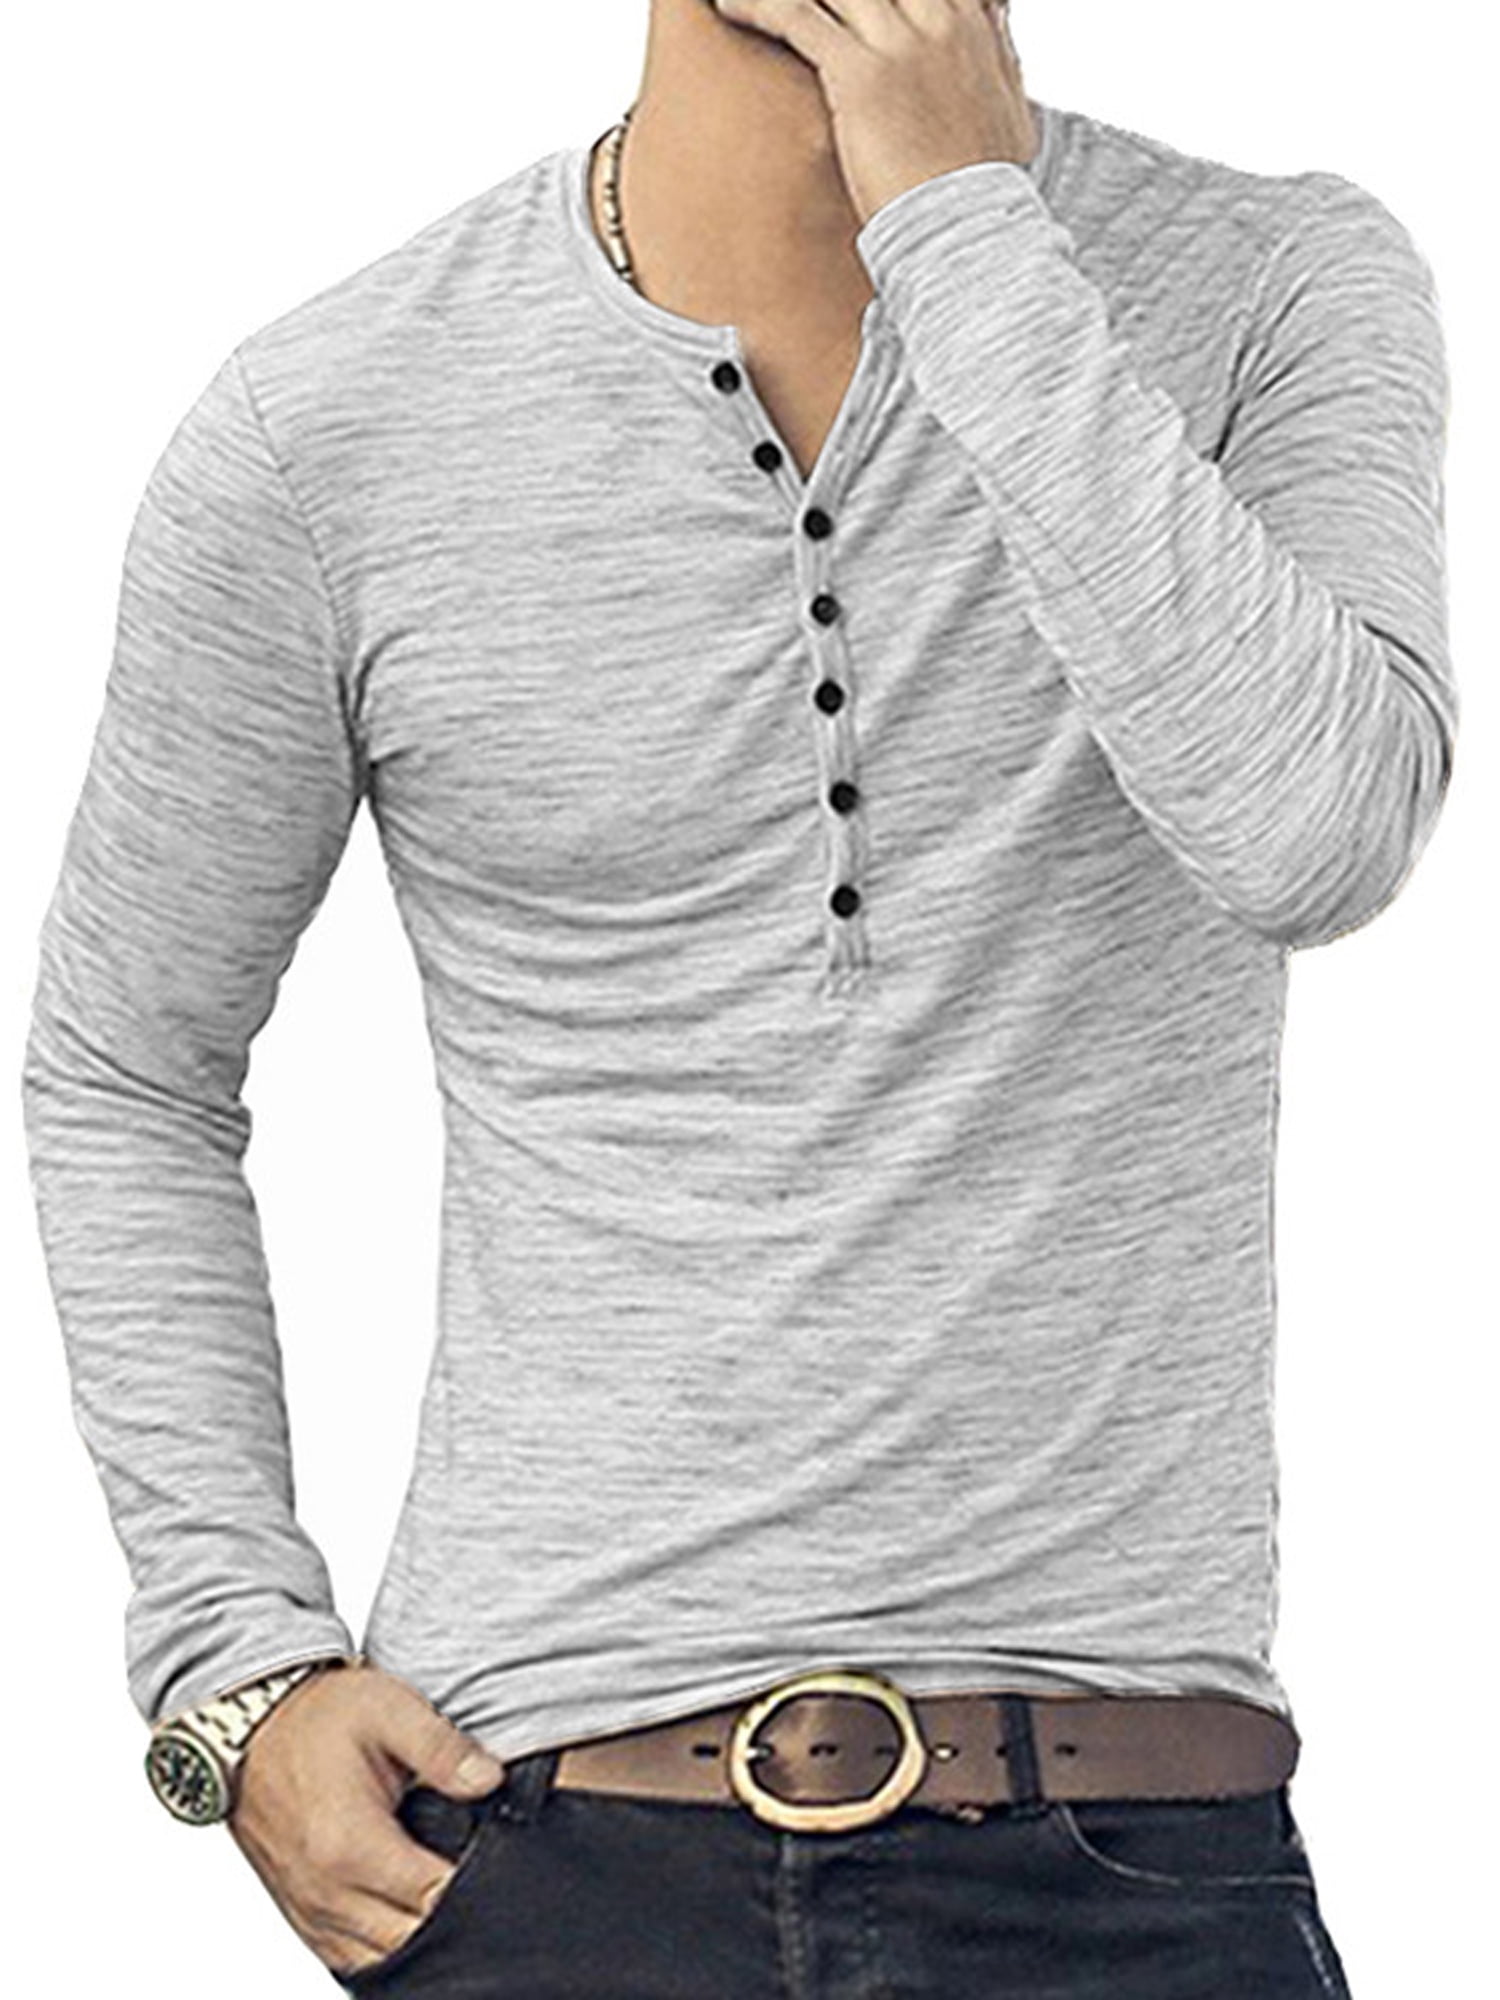 Mens Henley Tee Great Northwest Button Up Shirt Slim Fit Casual Pocket Soft NEW 